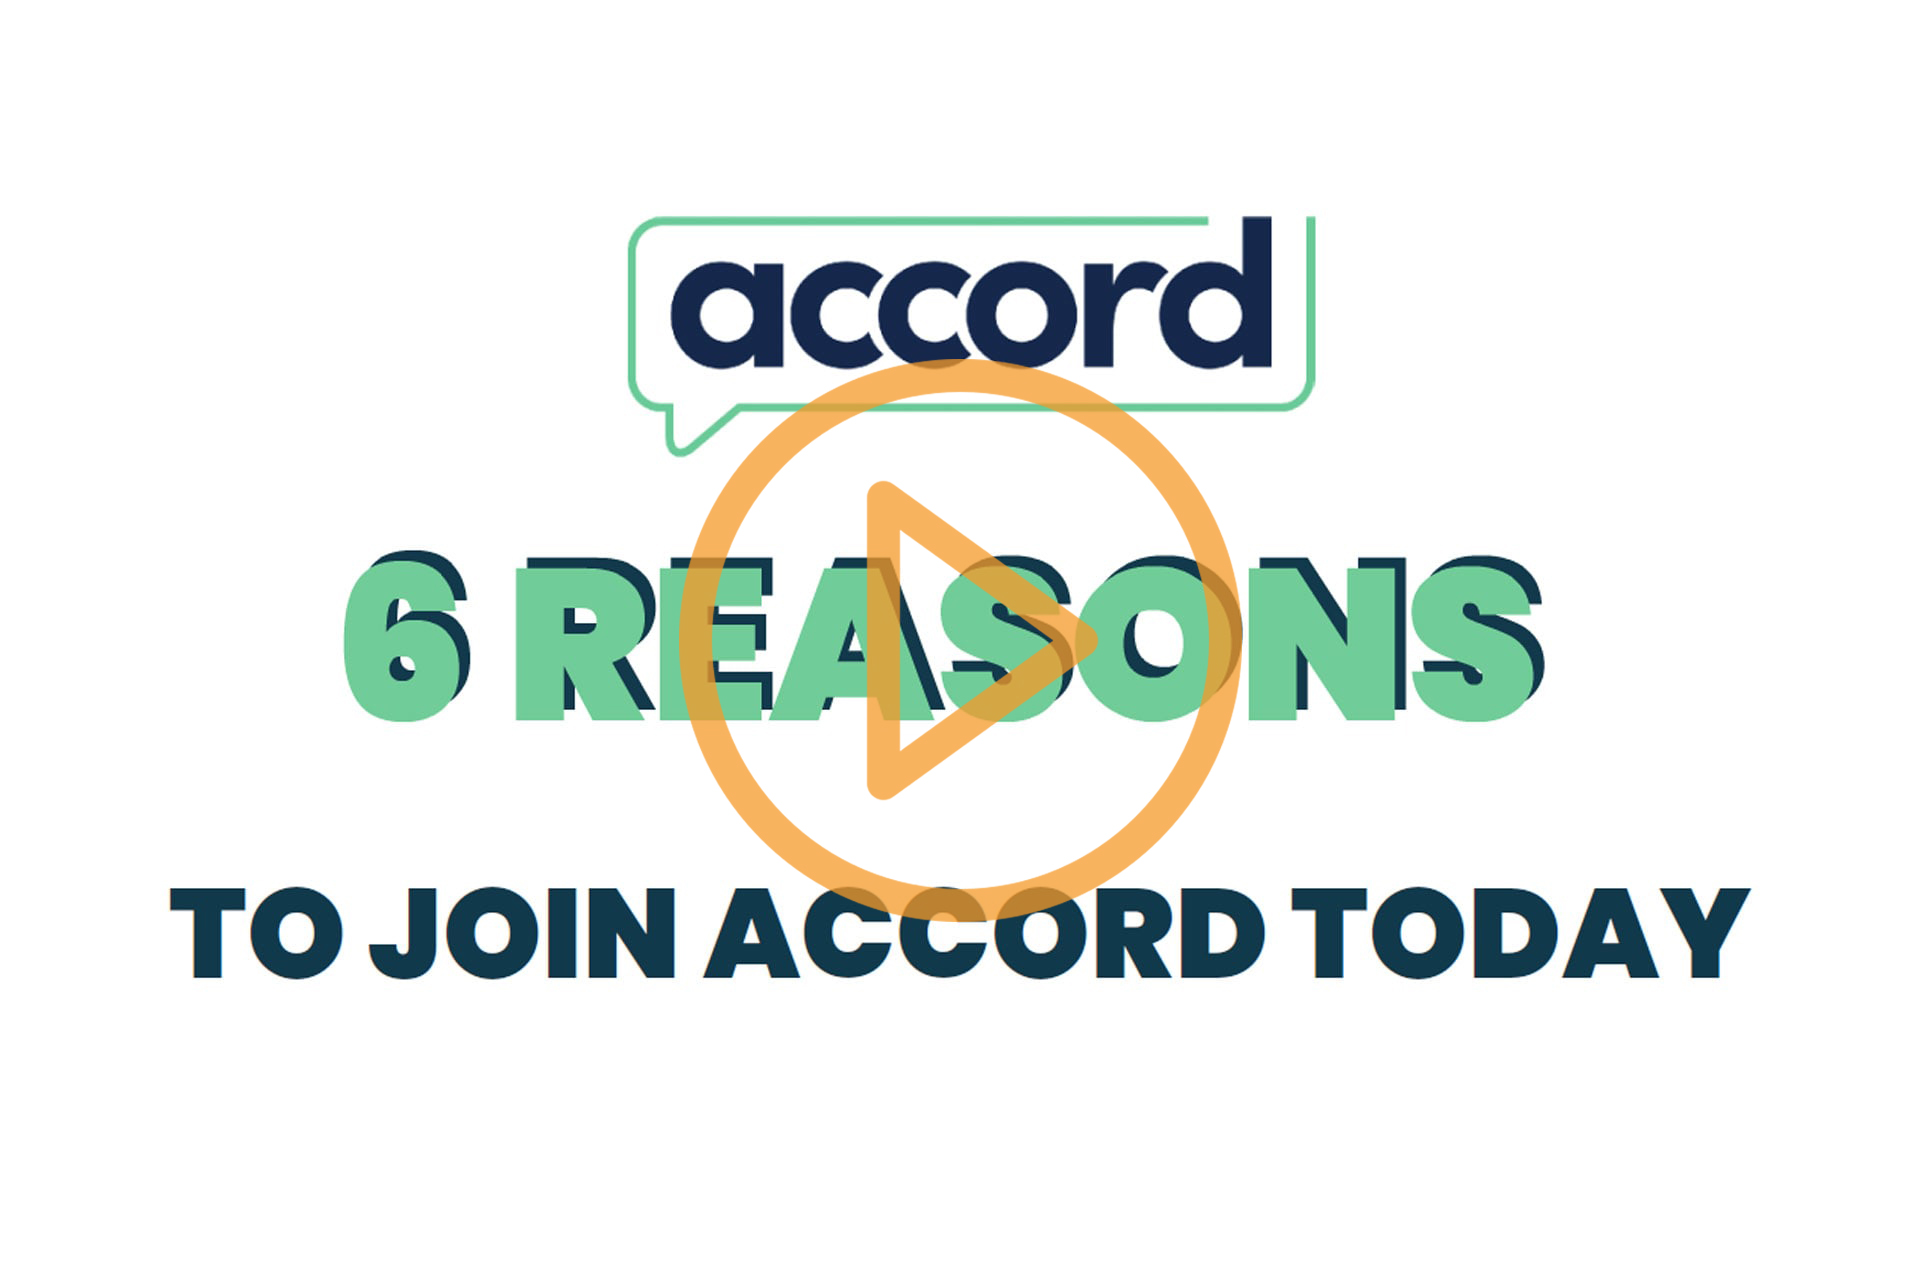 6 reasons to join Accord today